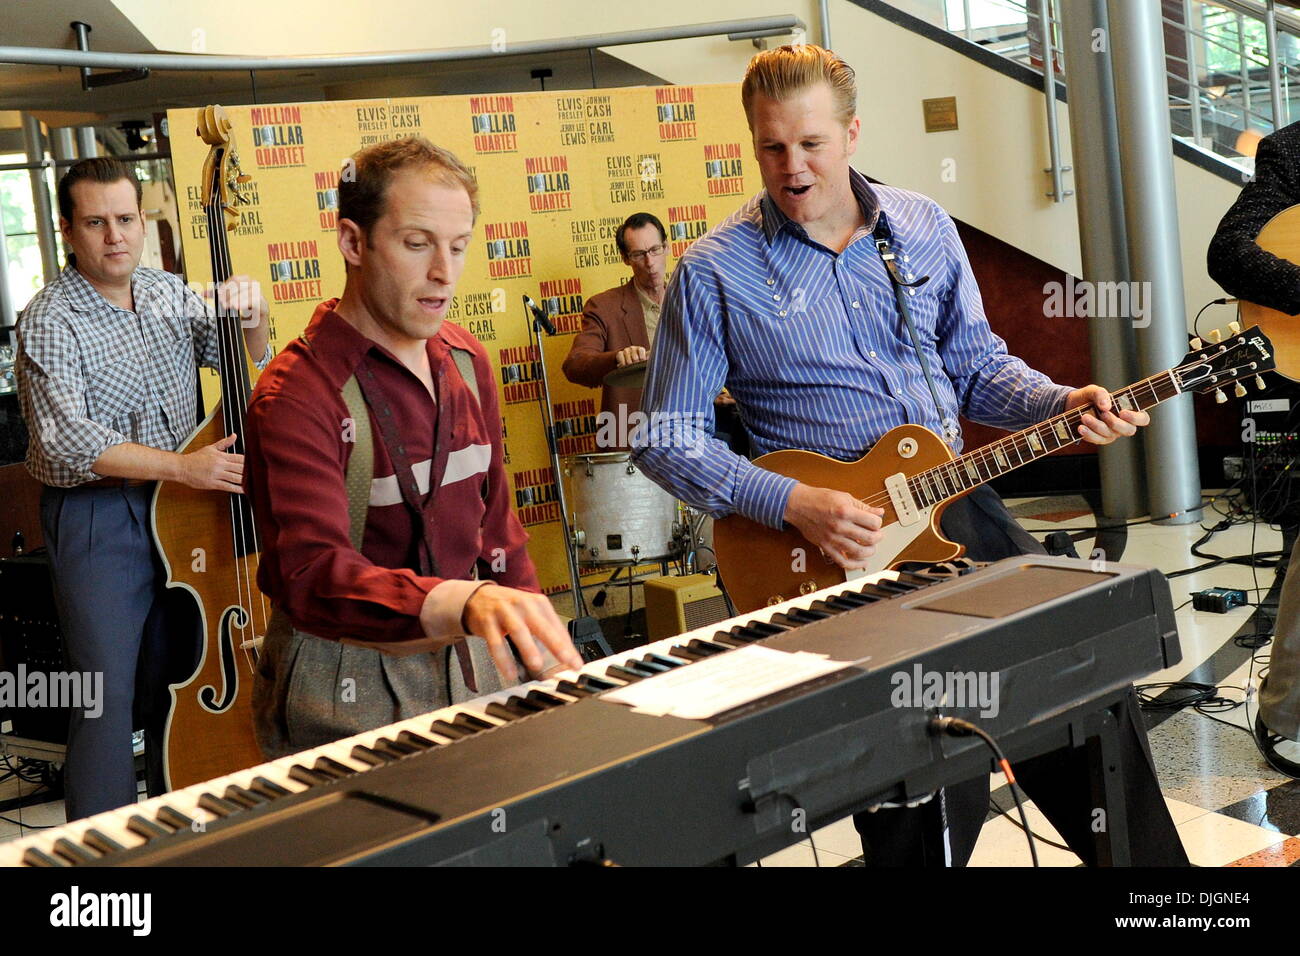 Martin Kaye as Jerry Lee Lewis and Lee Ferris as Carl Perkins 'Million Dollar Quartet' media preview at Toronto Centre for the Arts Toronto, Canada - 12.07.12 Stock Photo